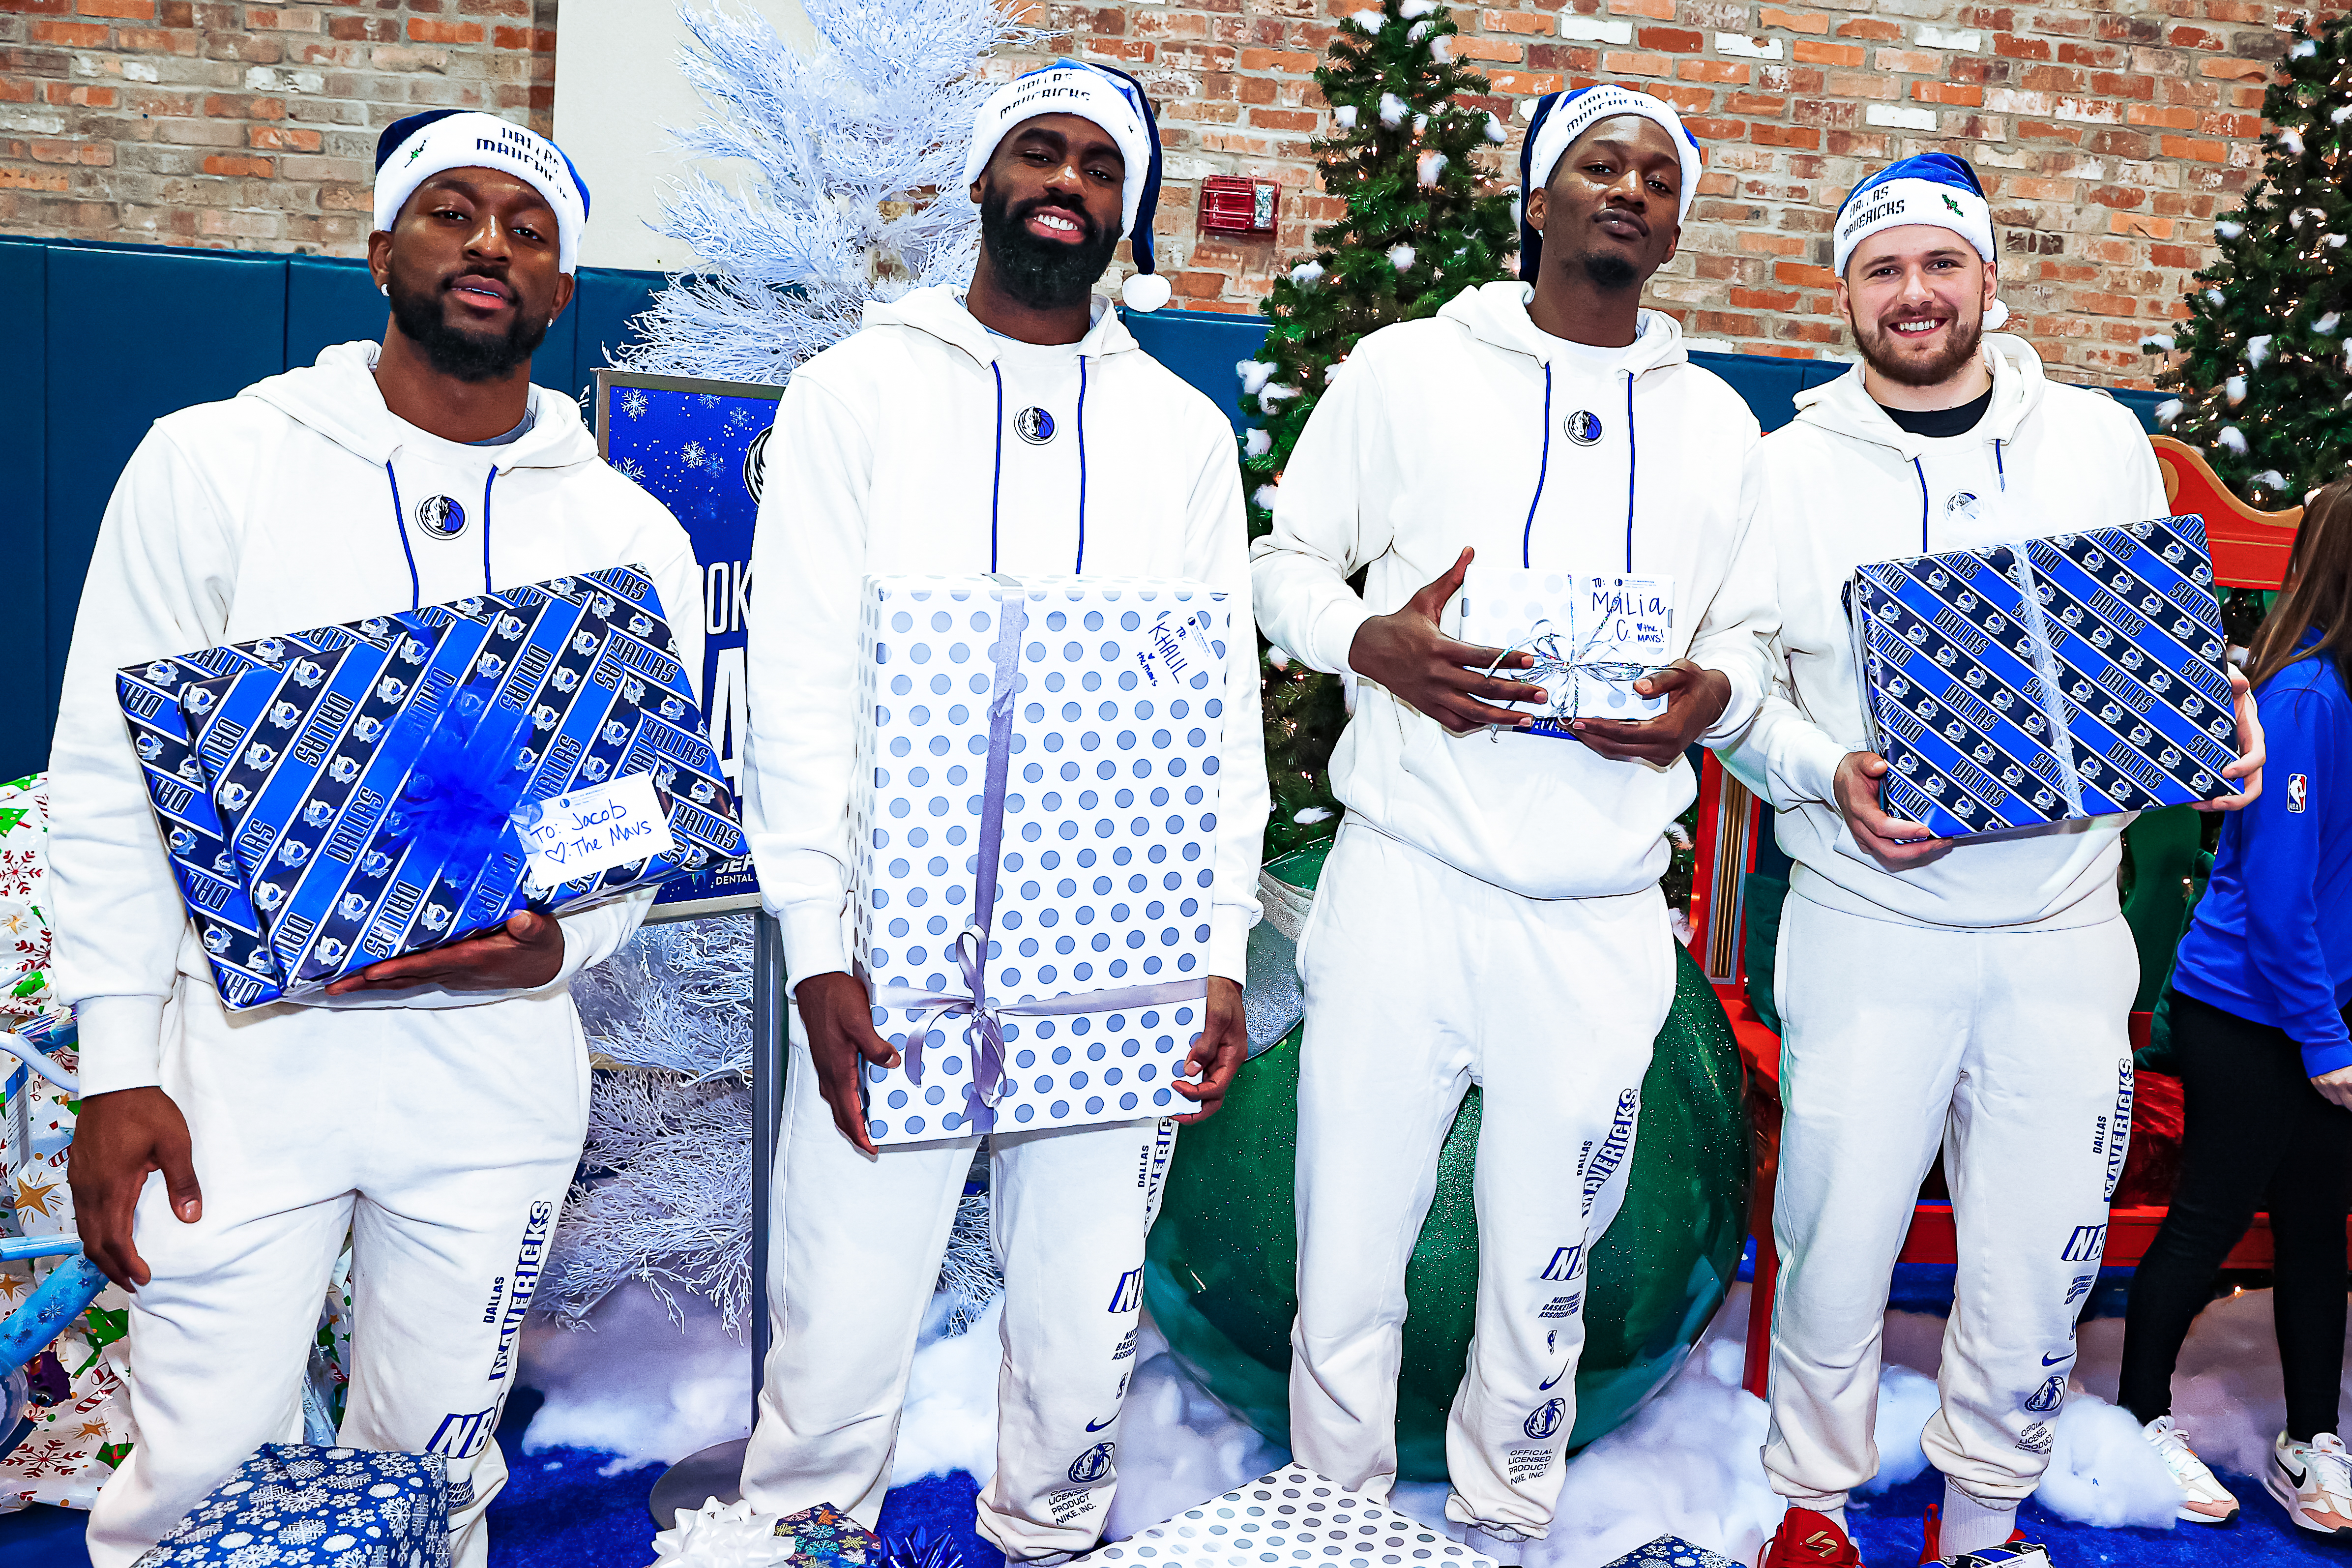 Are you liking these potential Mavericks Christmas Day uniforms?